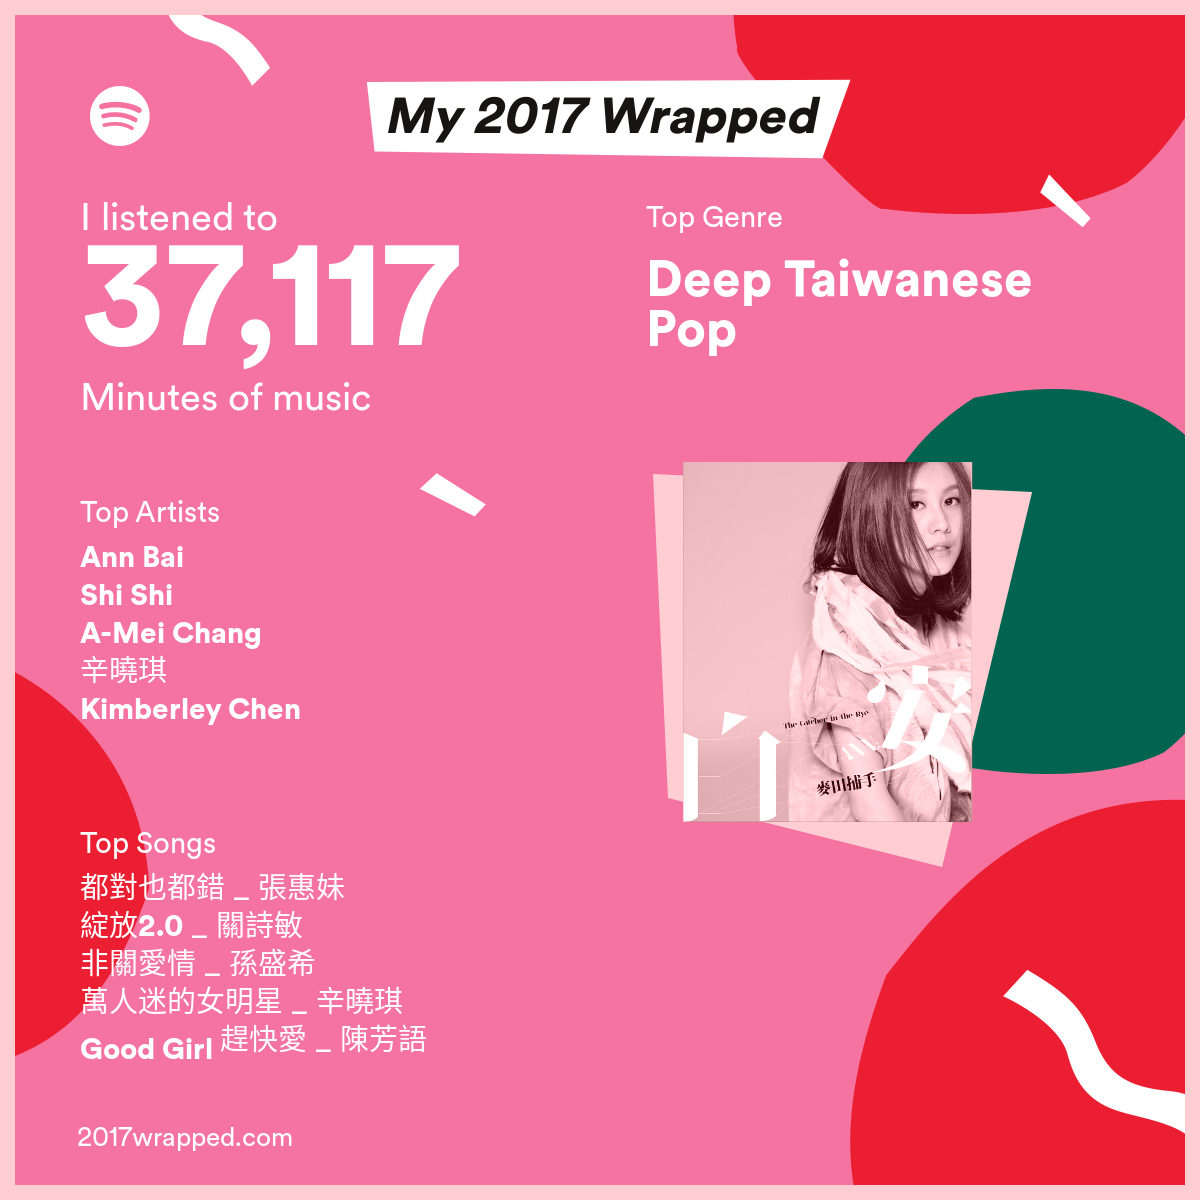 "My 2017 Wrapped" from Spotify